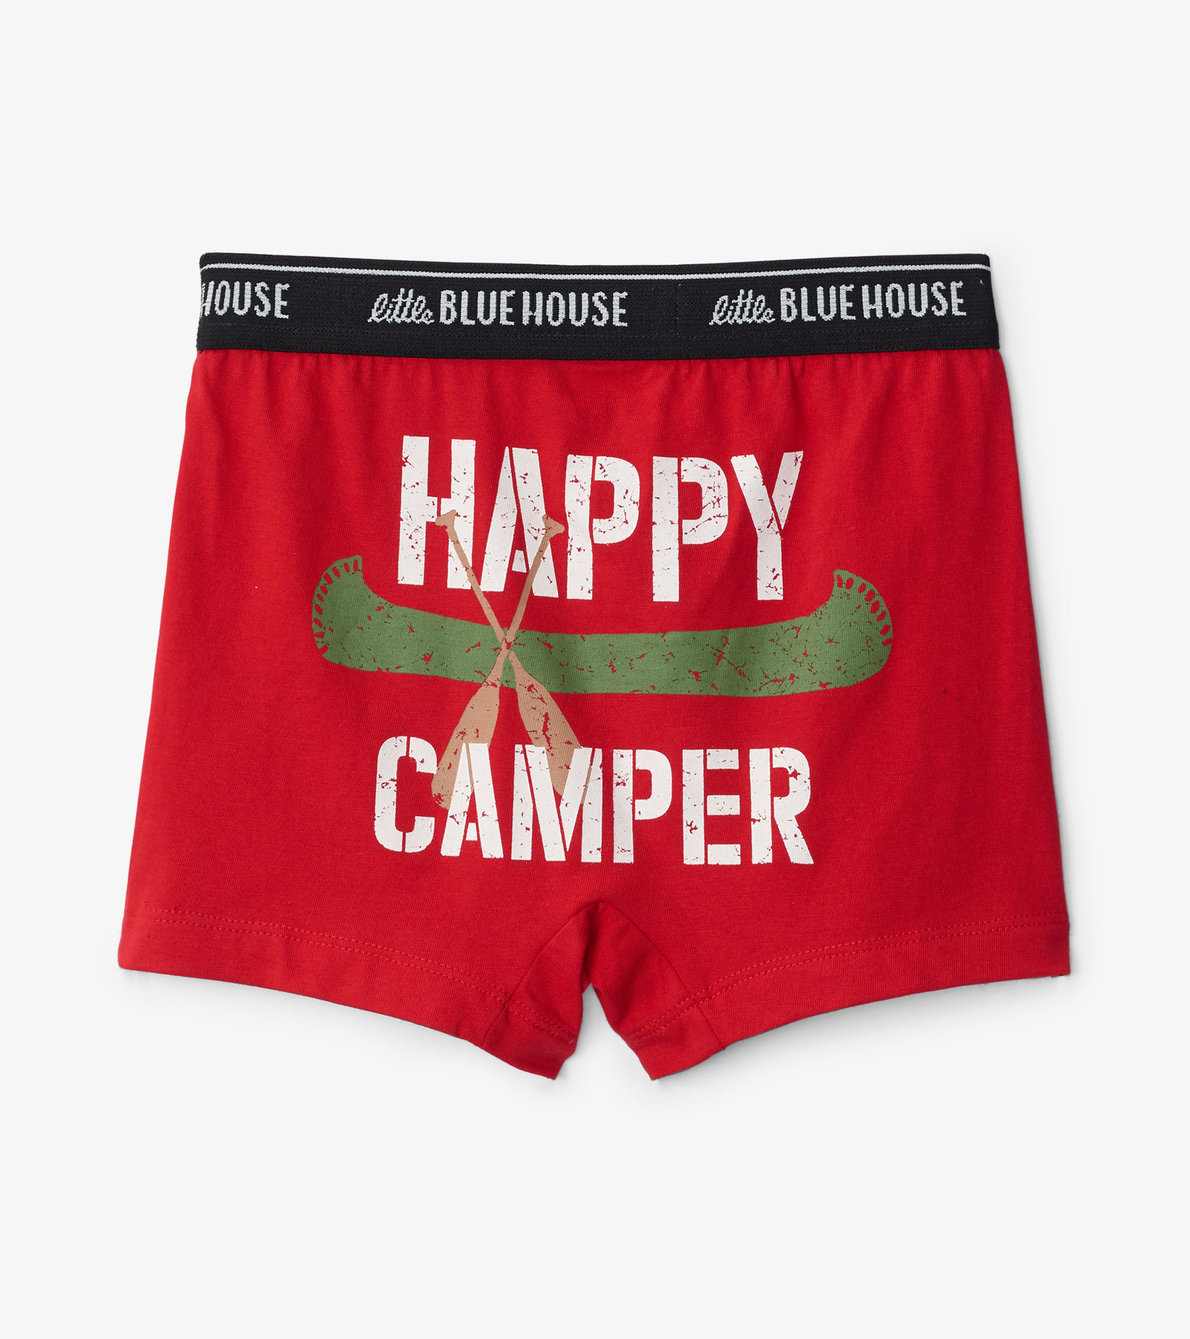 View larger image of Happy Camper Boy's Boxers Briefs